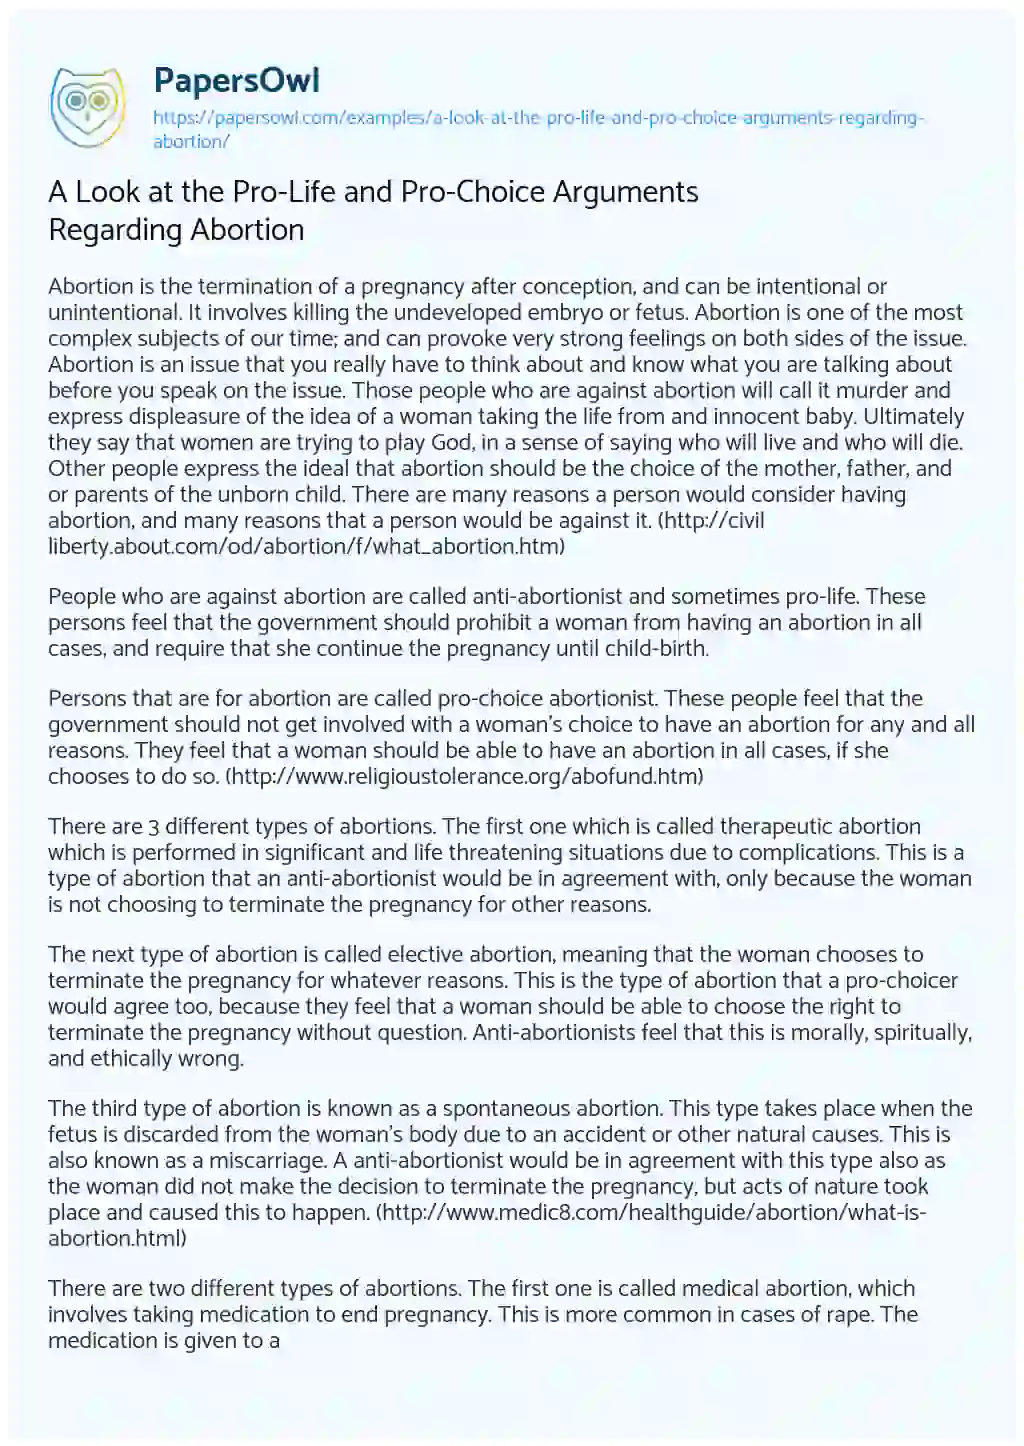 A Look at the Pro-Life and Pro-Choice Arguments Regarding Abortion essay